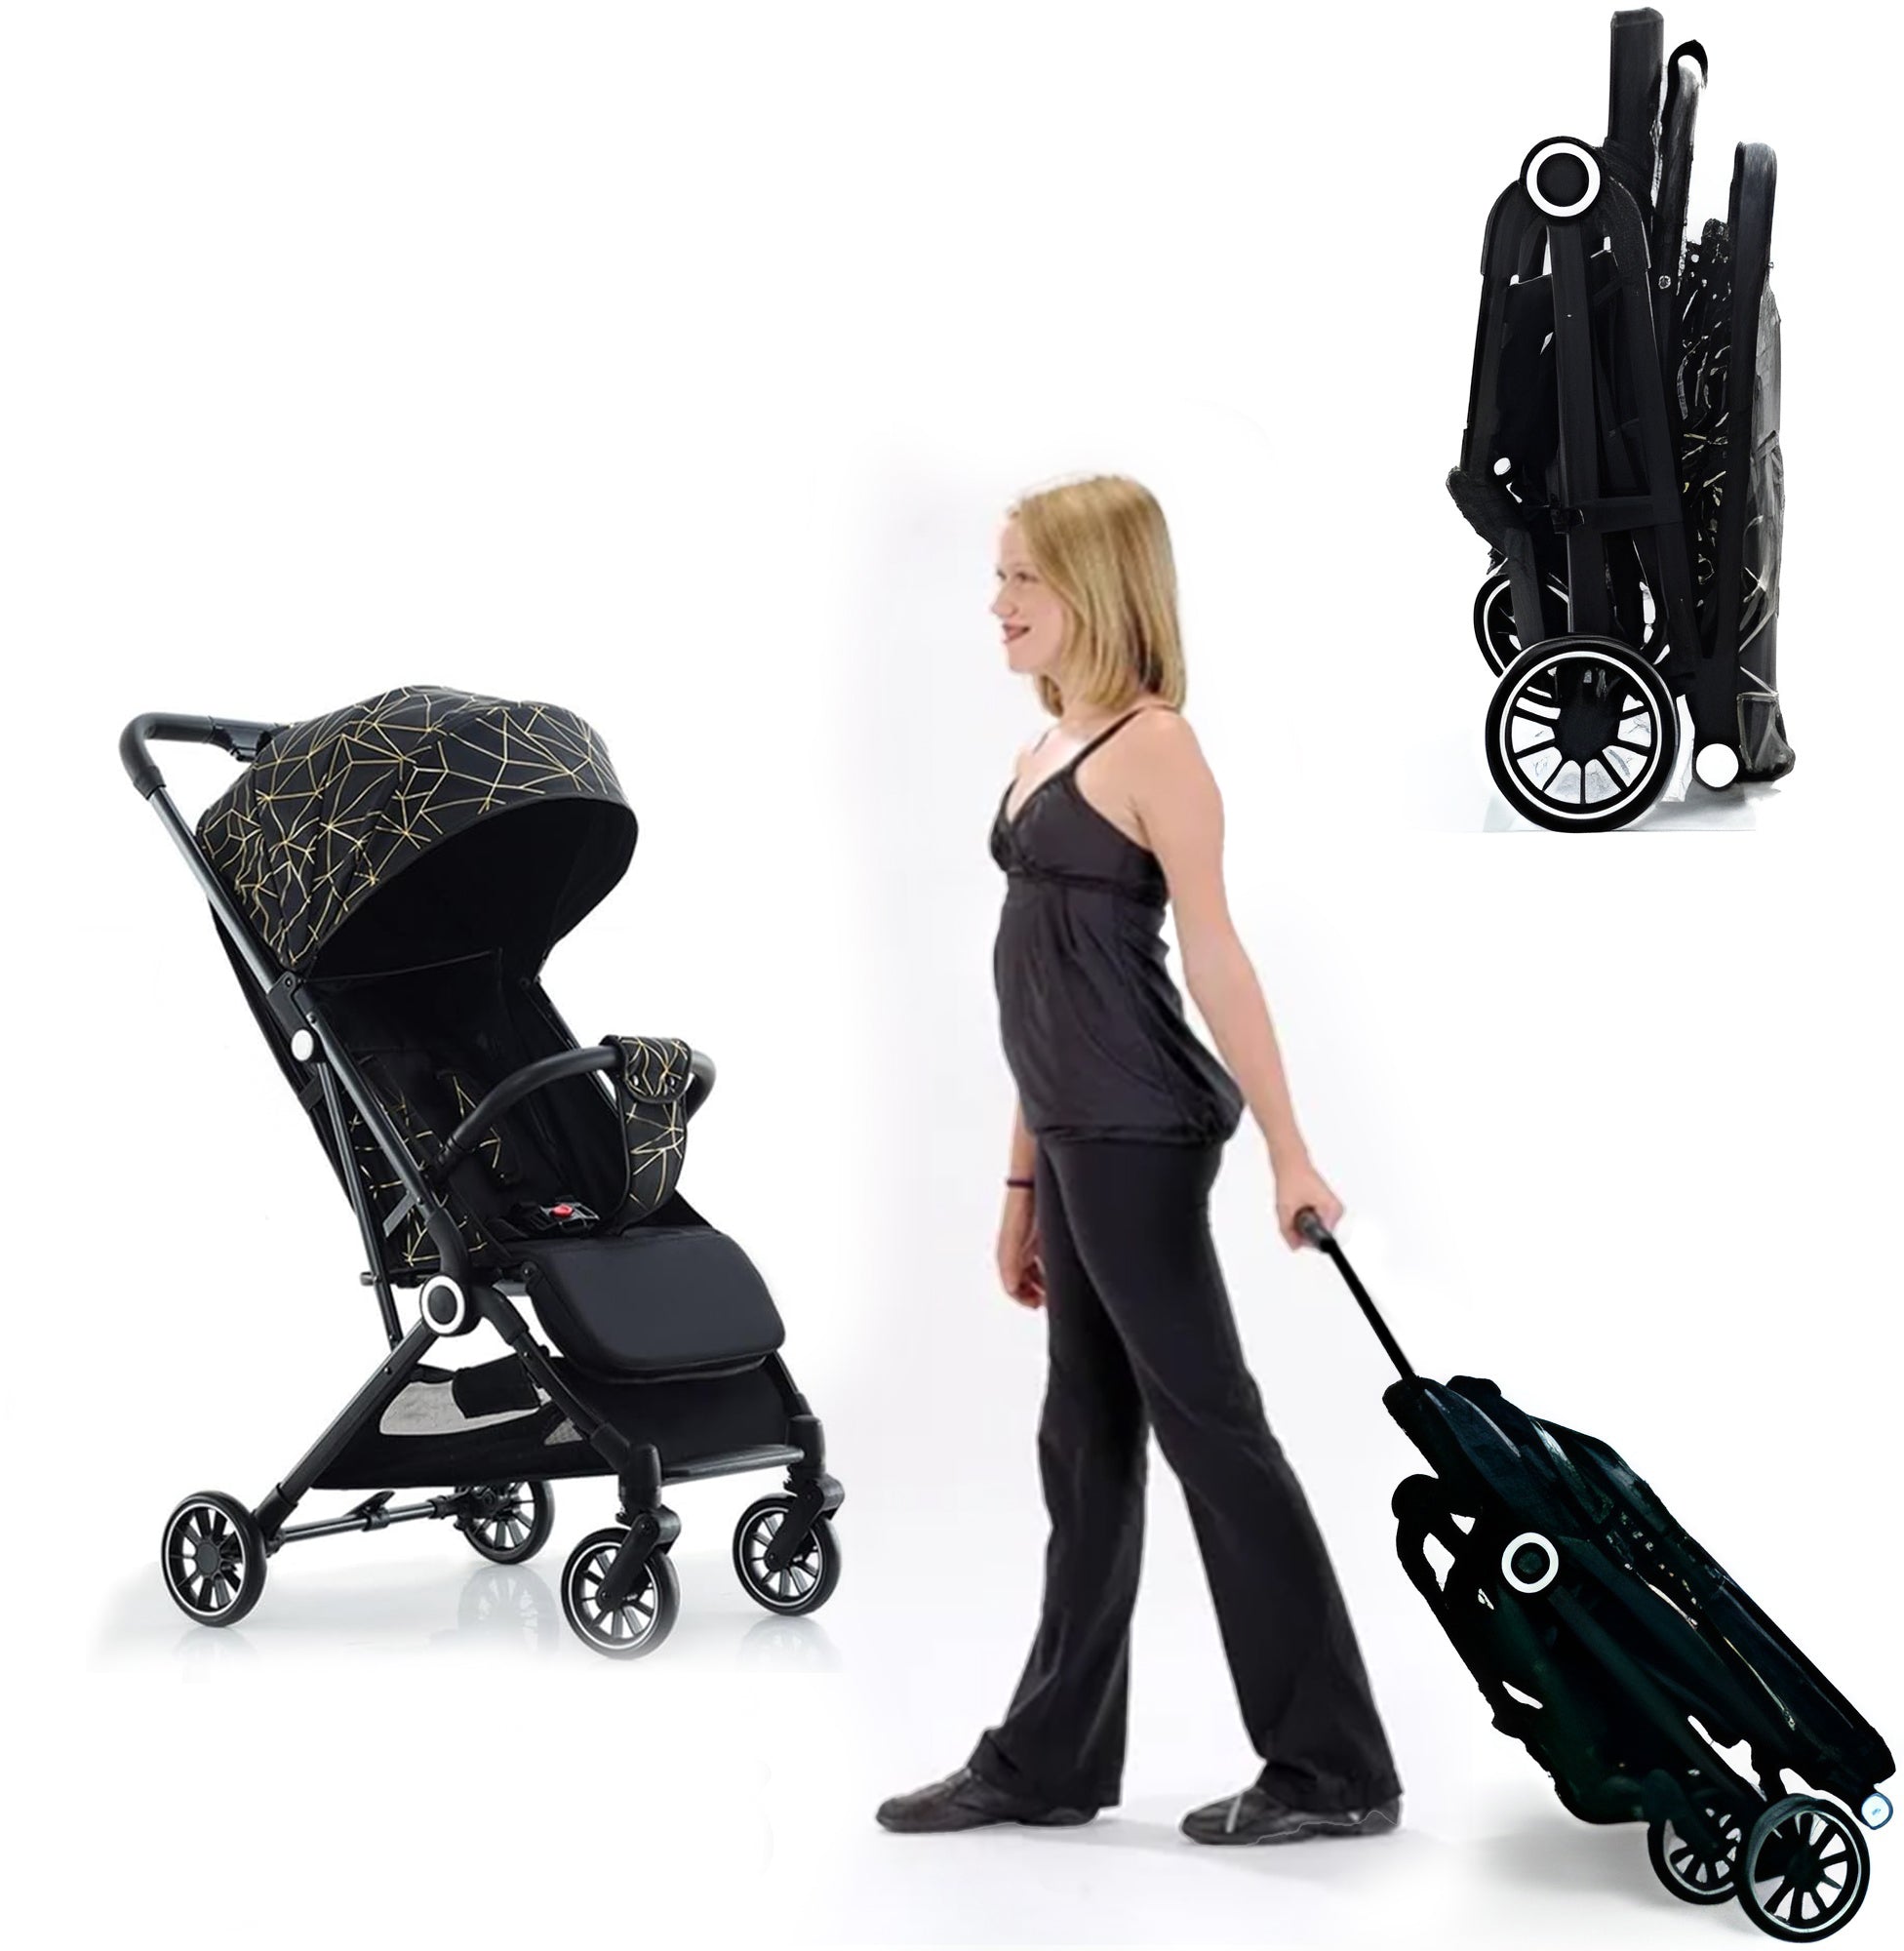 Lightweight Baby Stroller - One-Handed One-Step Fold, Safety Standard, for 0-3 Years